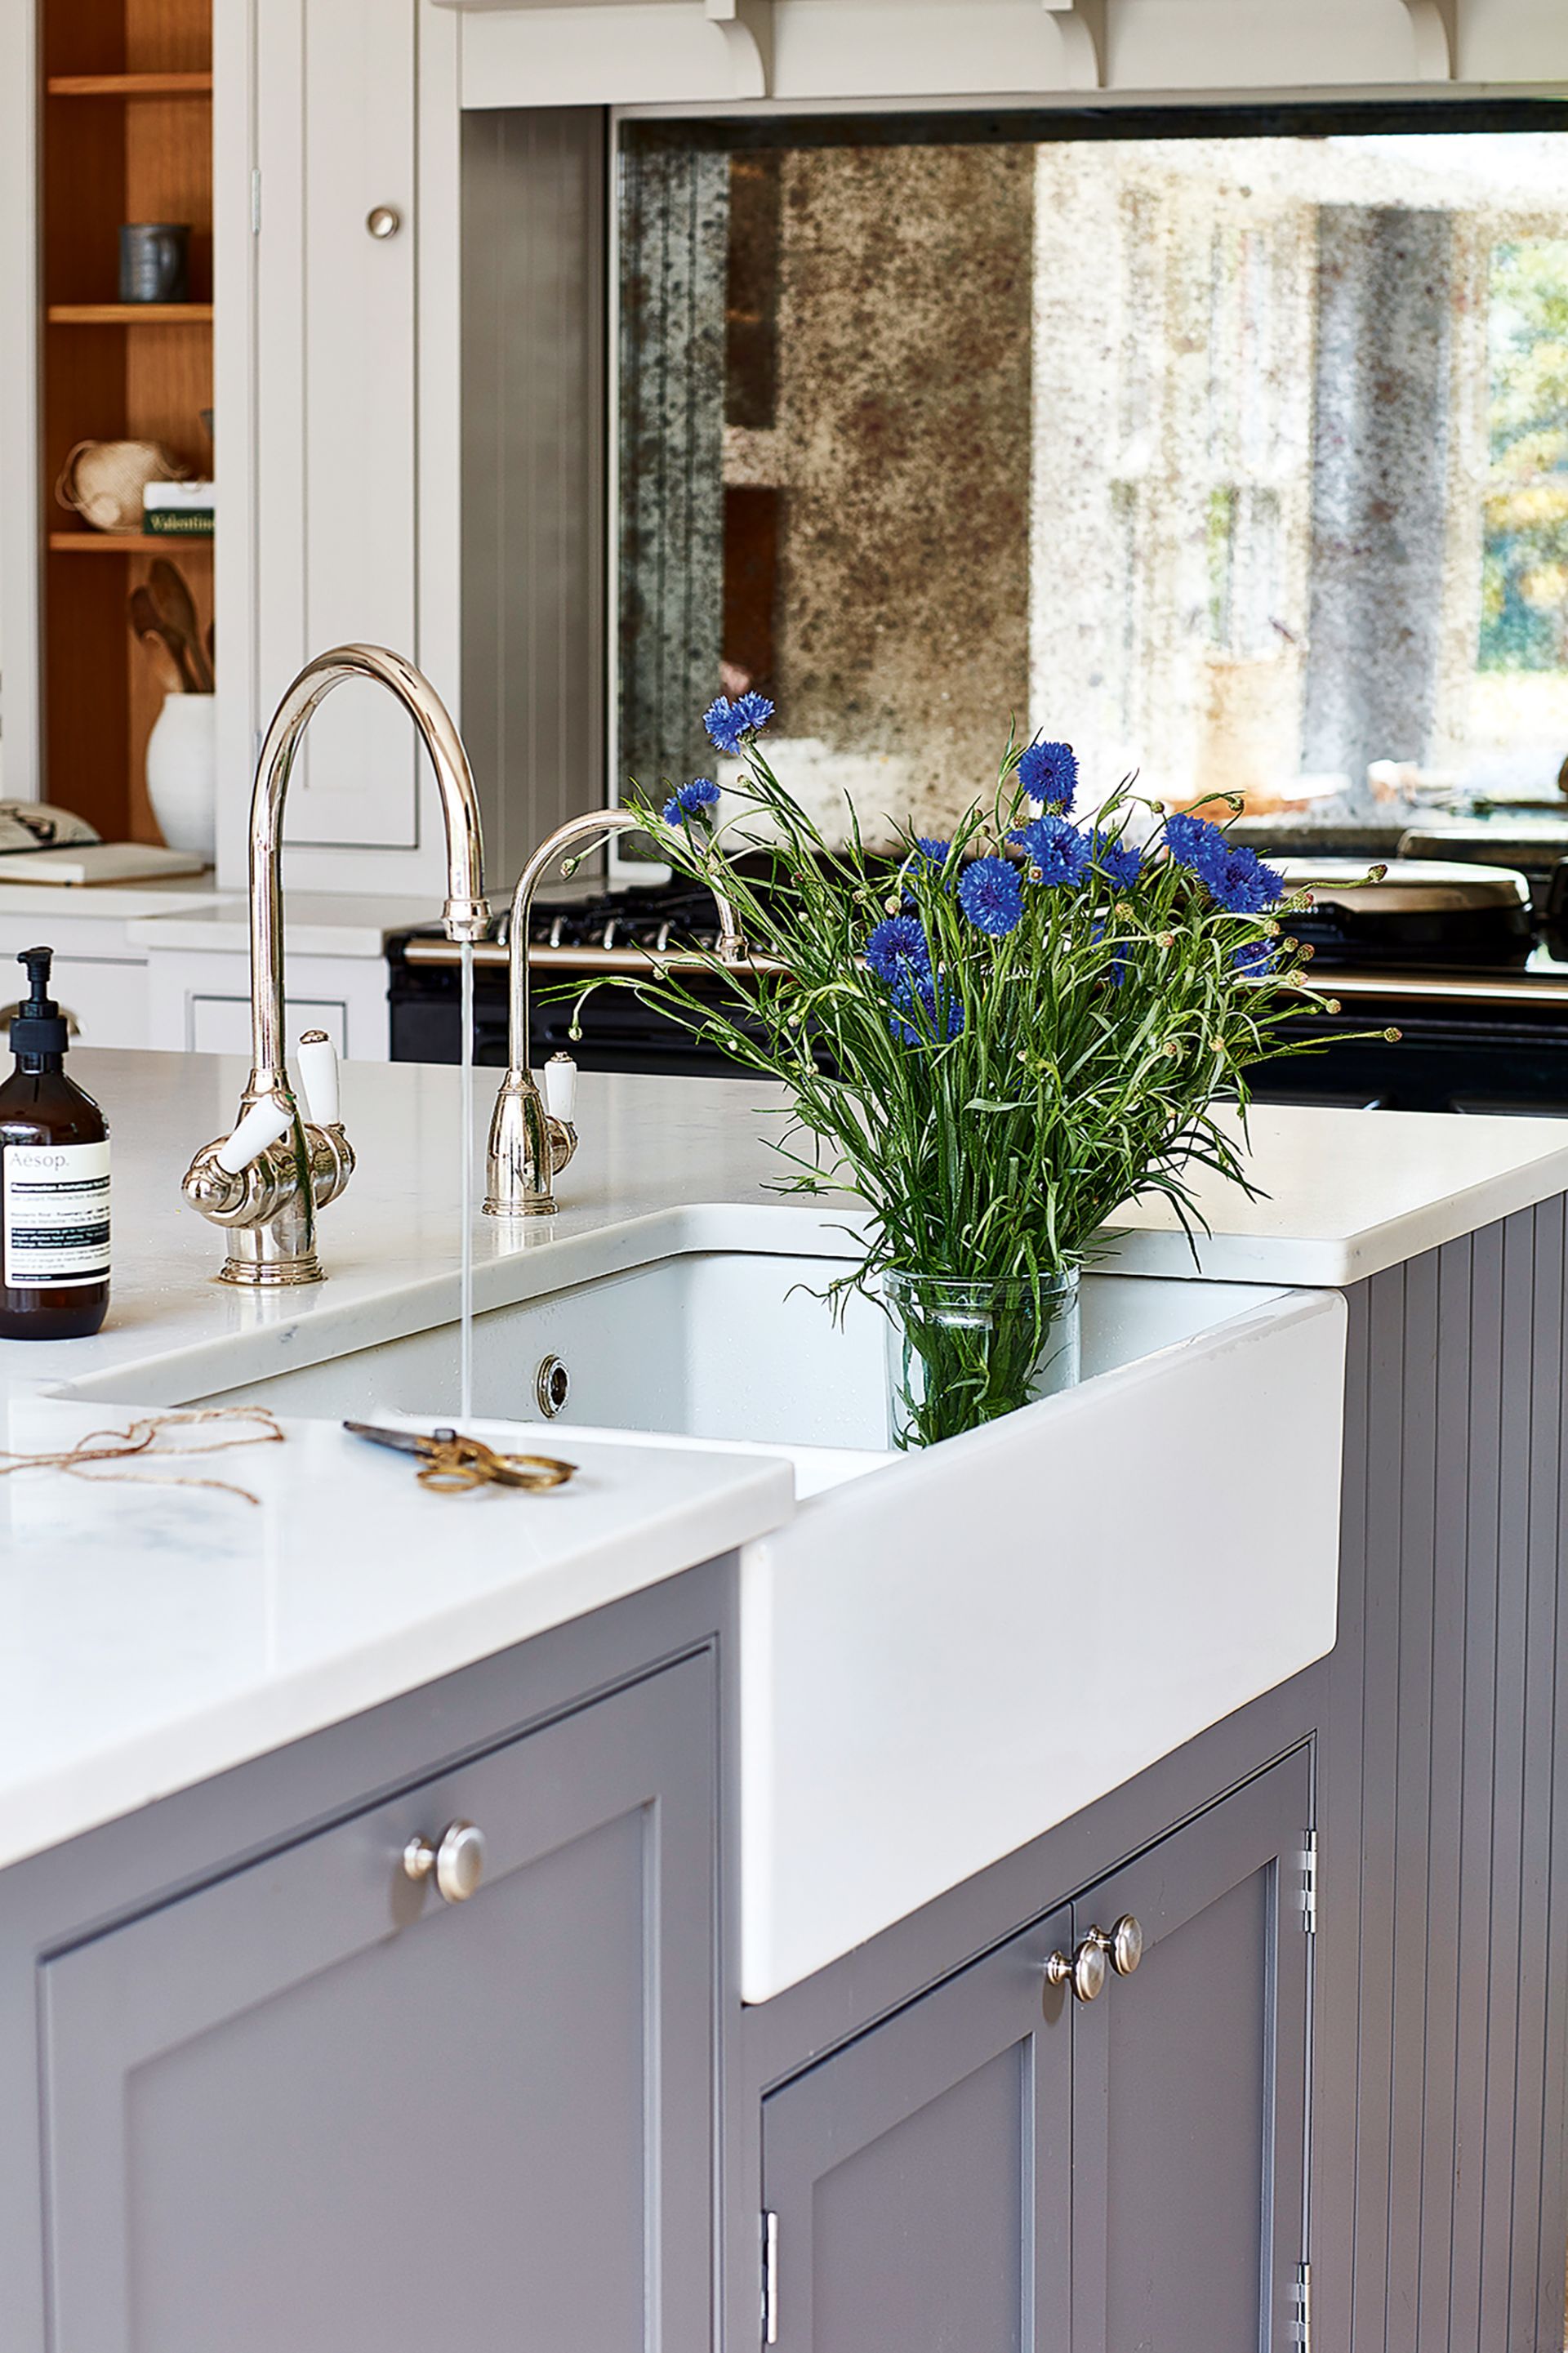 Kitchen sink ideas – designs for your remodel